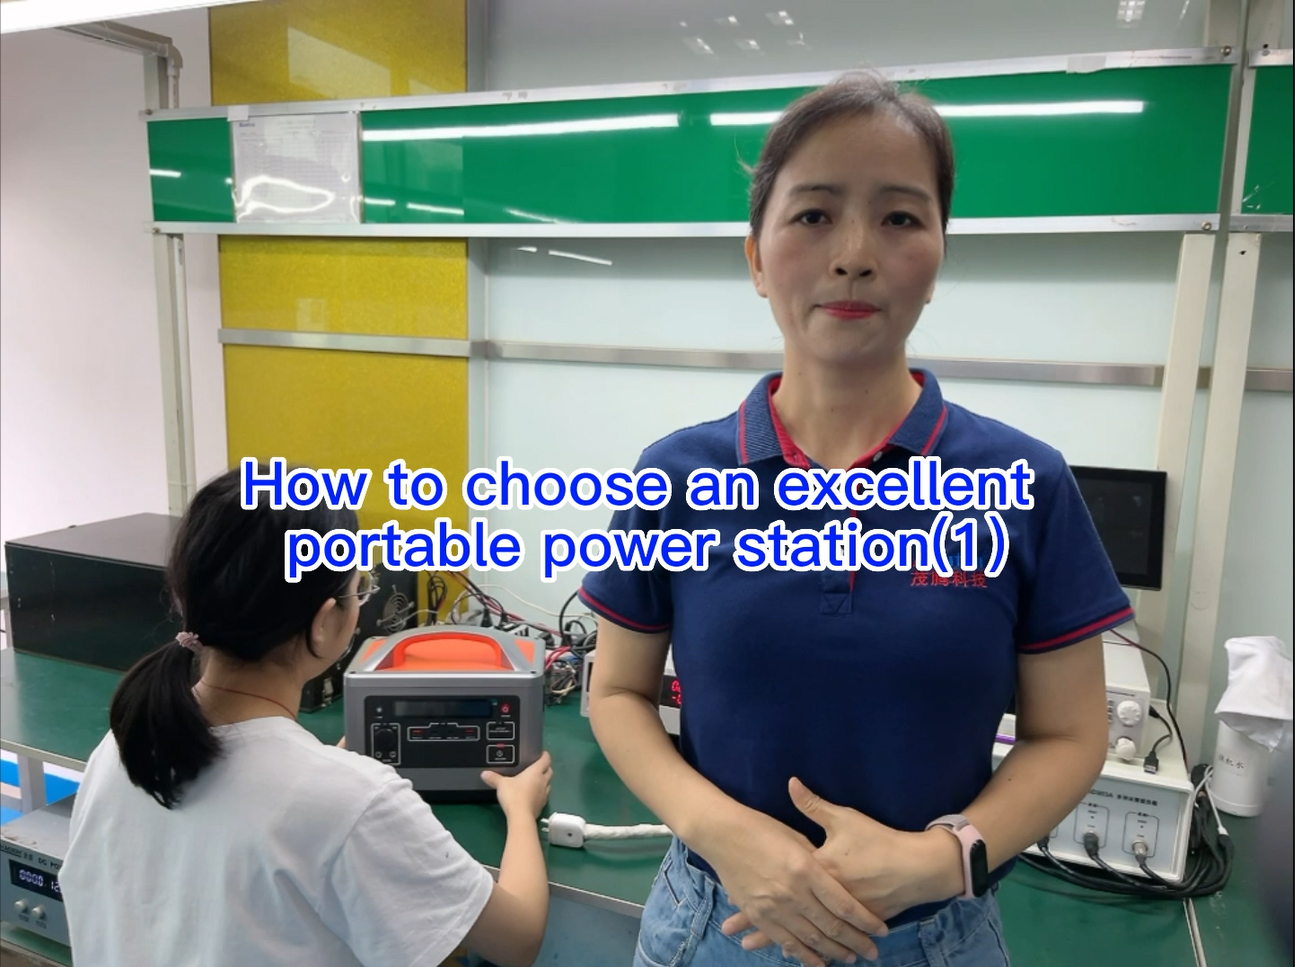 How to choose an excellent portable power station?